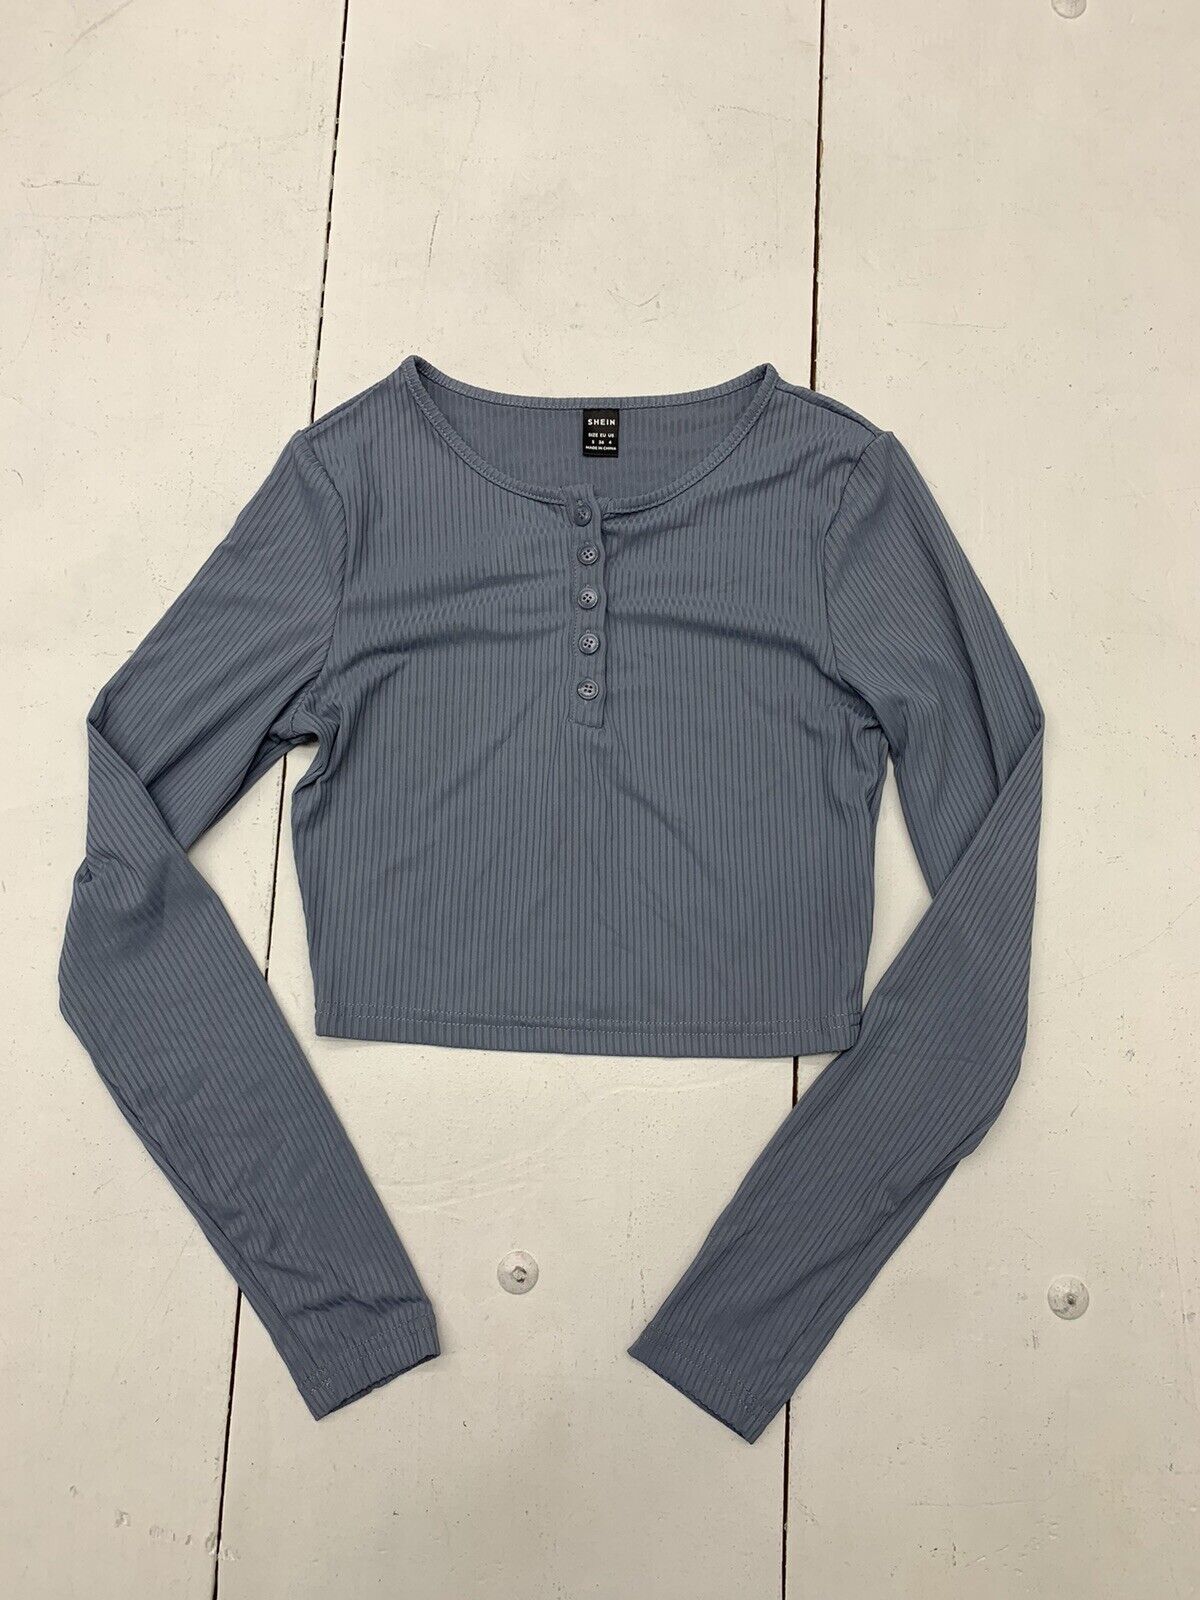 Shein Womens Grey/Blue Cropped Long Sleeve Shirt Size Small - beyond  exchange